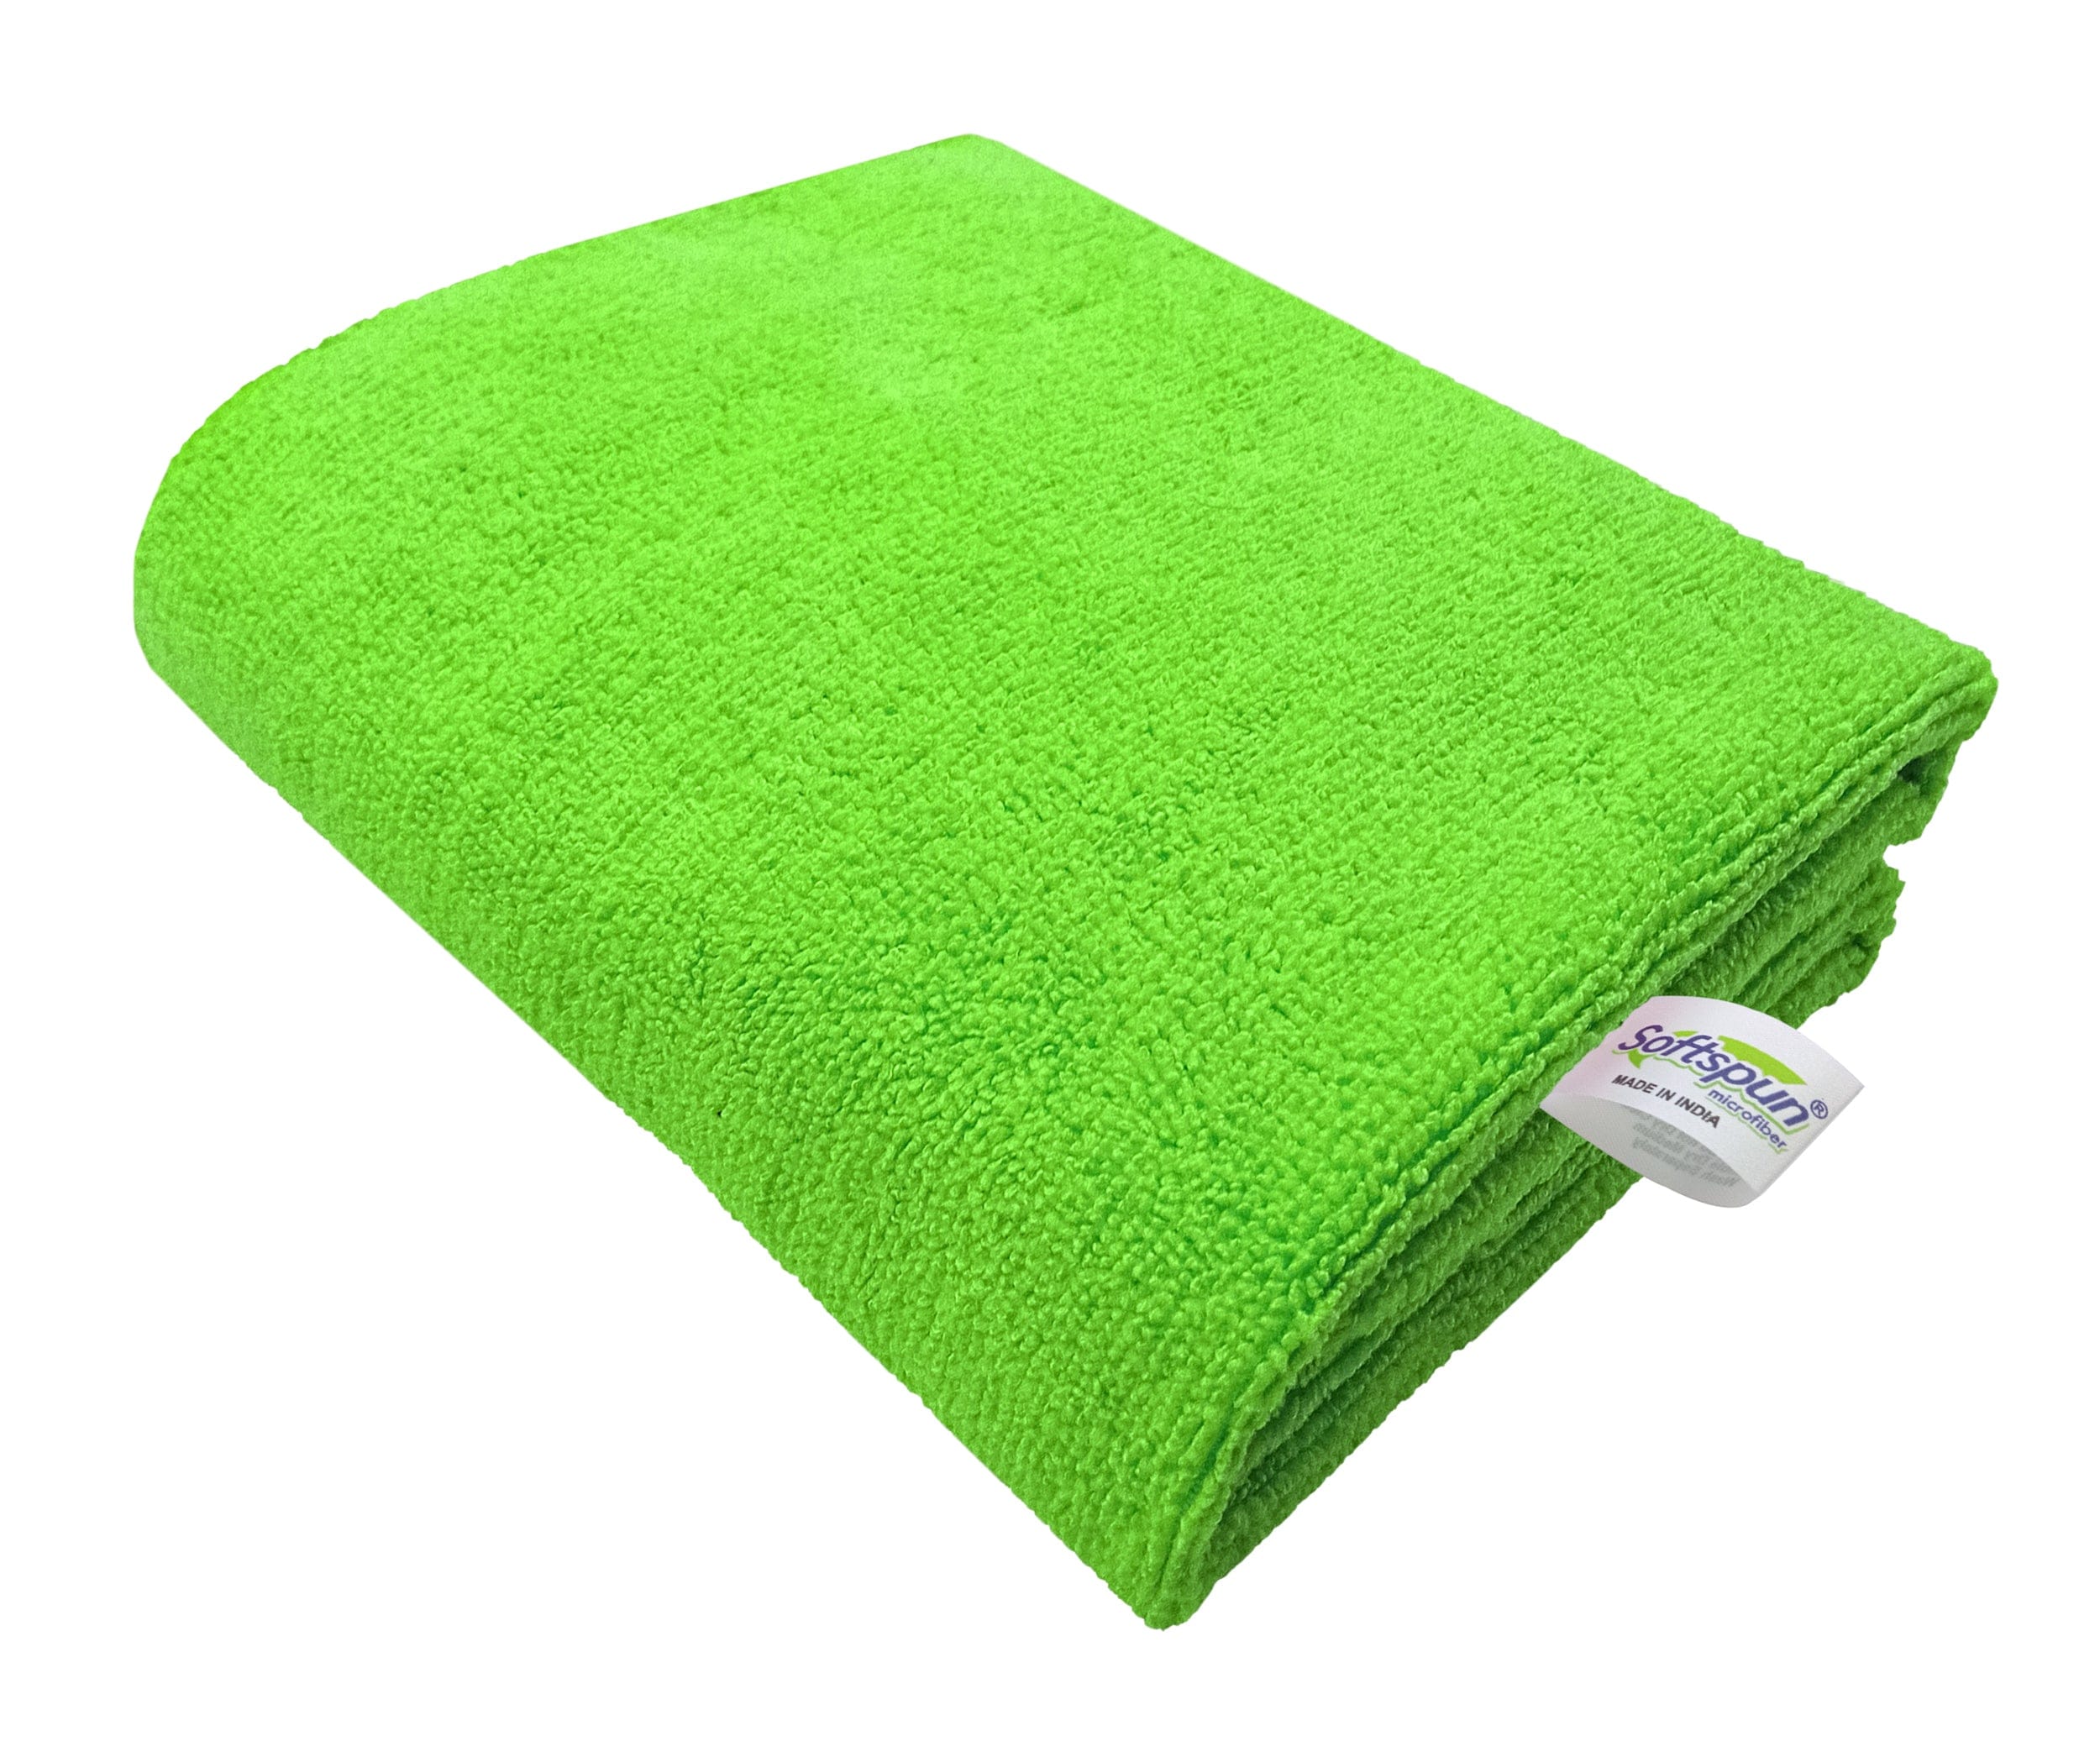 SOFTSPUN Microfiber Gym & Sports Towels for Men & Women 1 pcs, 340 GSM. Fast Drying, Super Absorbent, Lightweight & Ultra-Compact Sweat Towels for Working Out Camping, Hiking, Travel